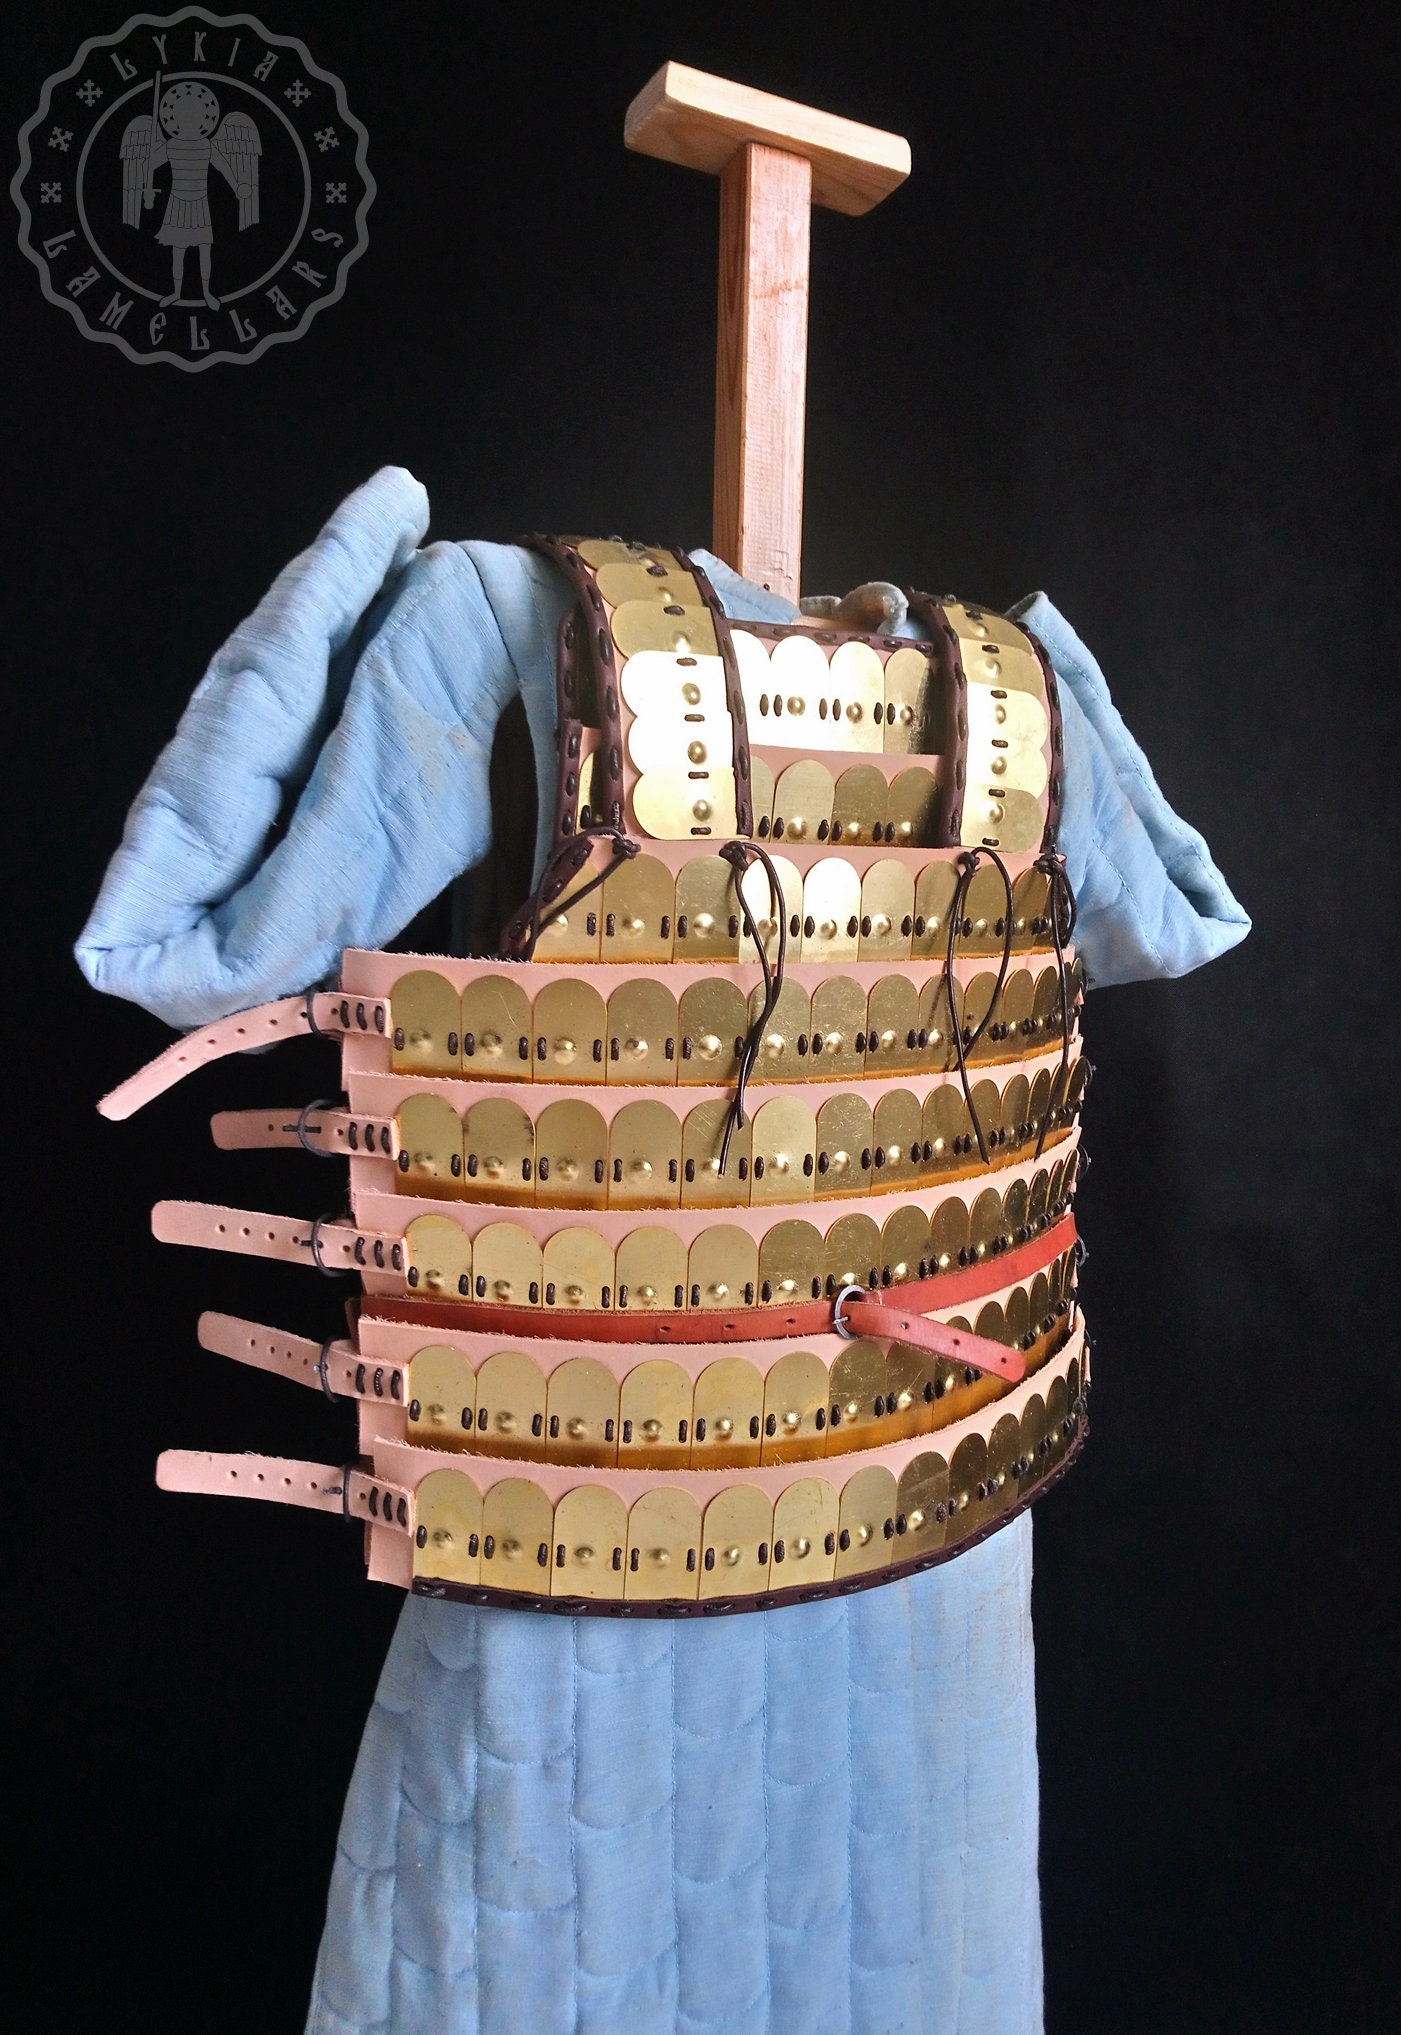 Lamellar Scale Plate Armour. Byzantium, Russia and Viking historical